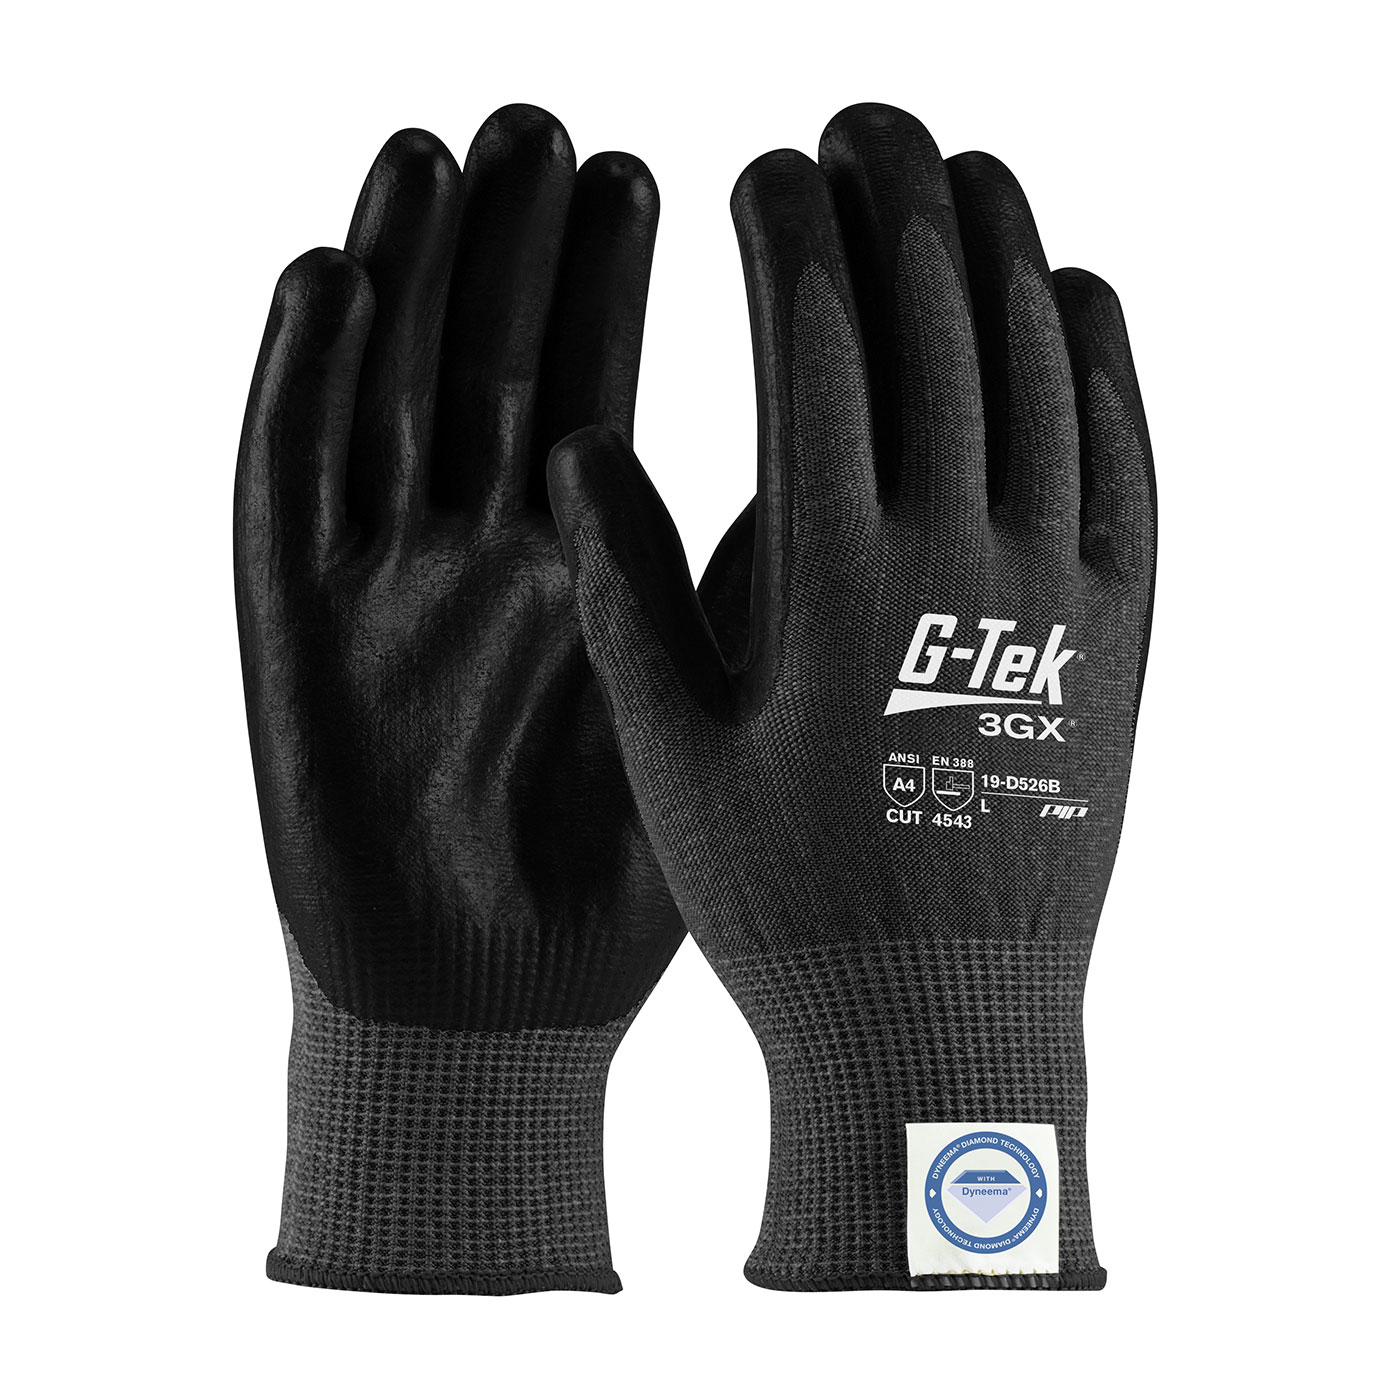 19-D526B PIP® G-Tek® 3GX® Black Seamless Knit Dyneema® Diamond Blended Glove with Polyurethane Coated Smooth Grip on Palm & Fingers - Touchscreen Compatible